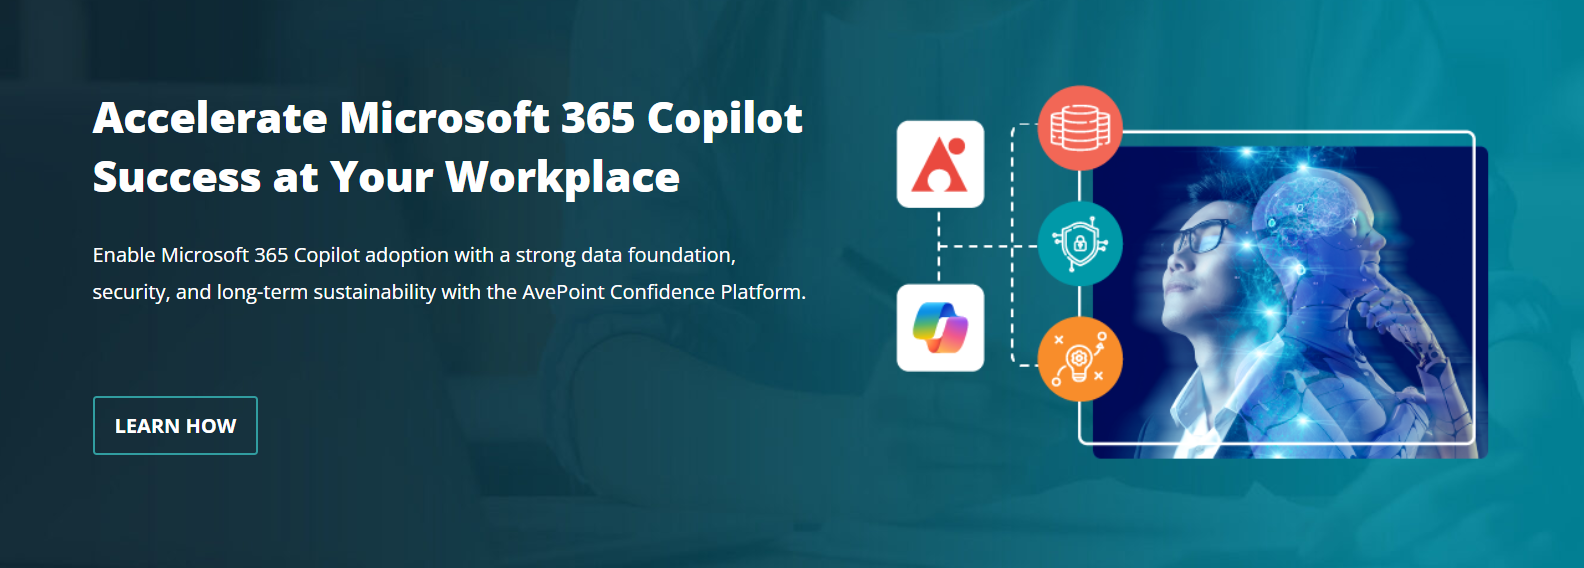 Microsoft 365 Copilot - Accelerate Success with AvePoint - Learn More